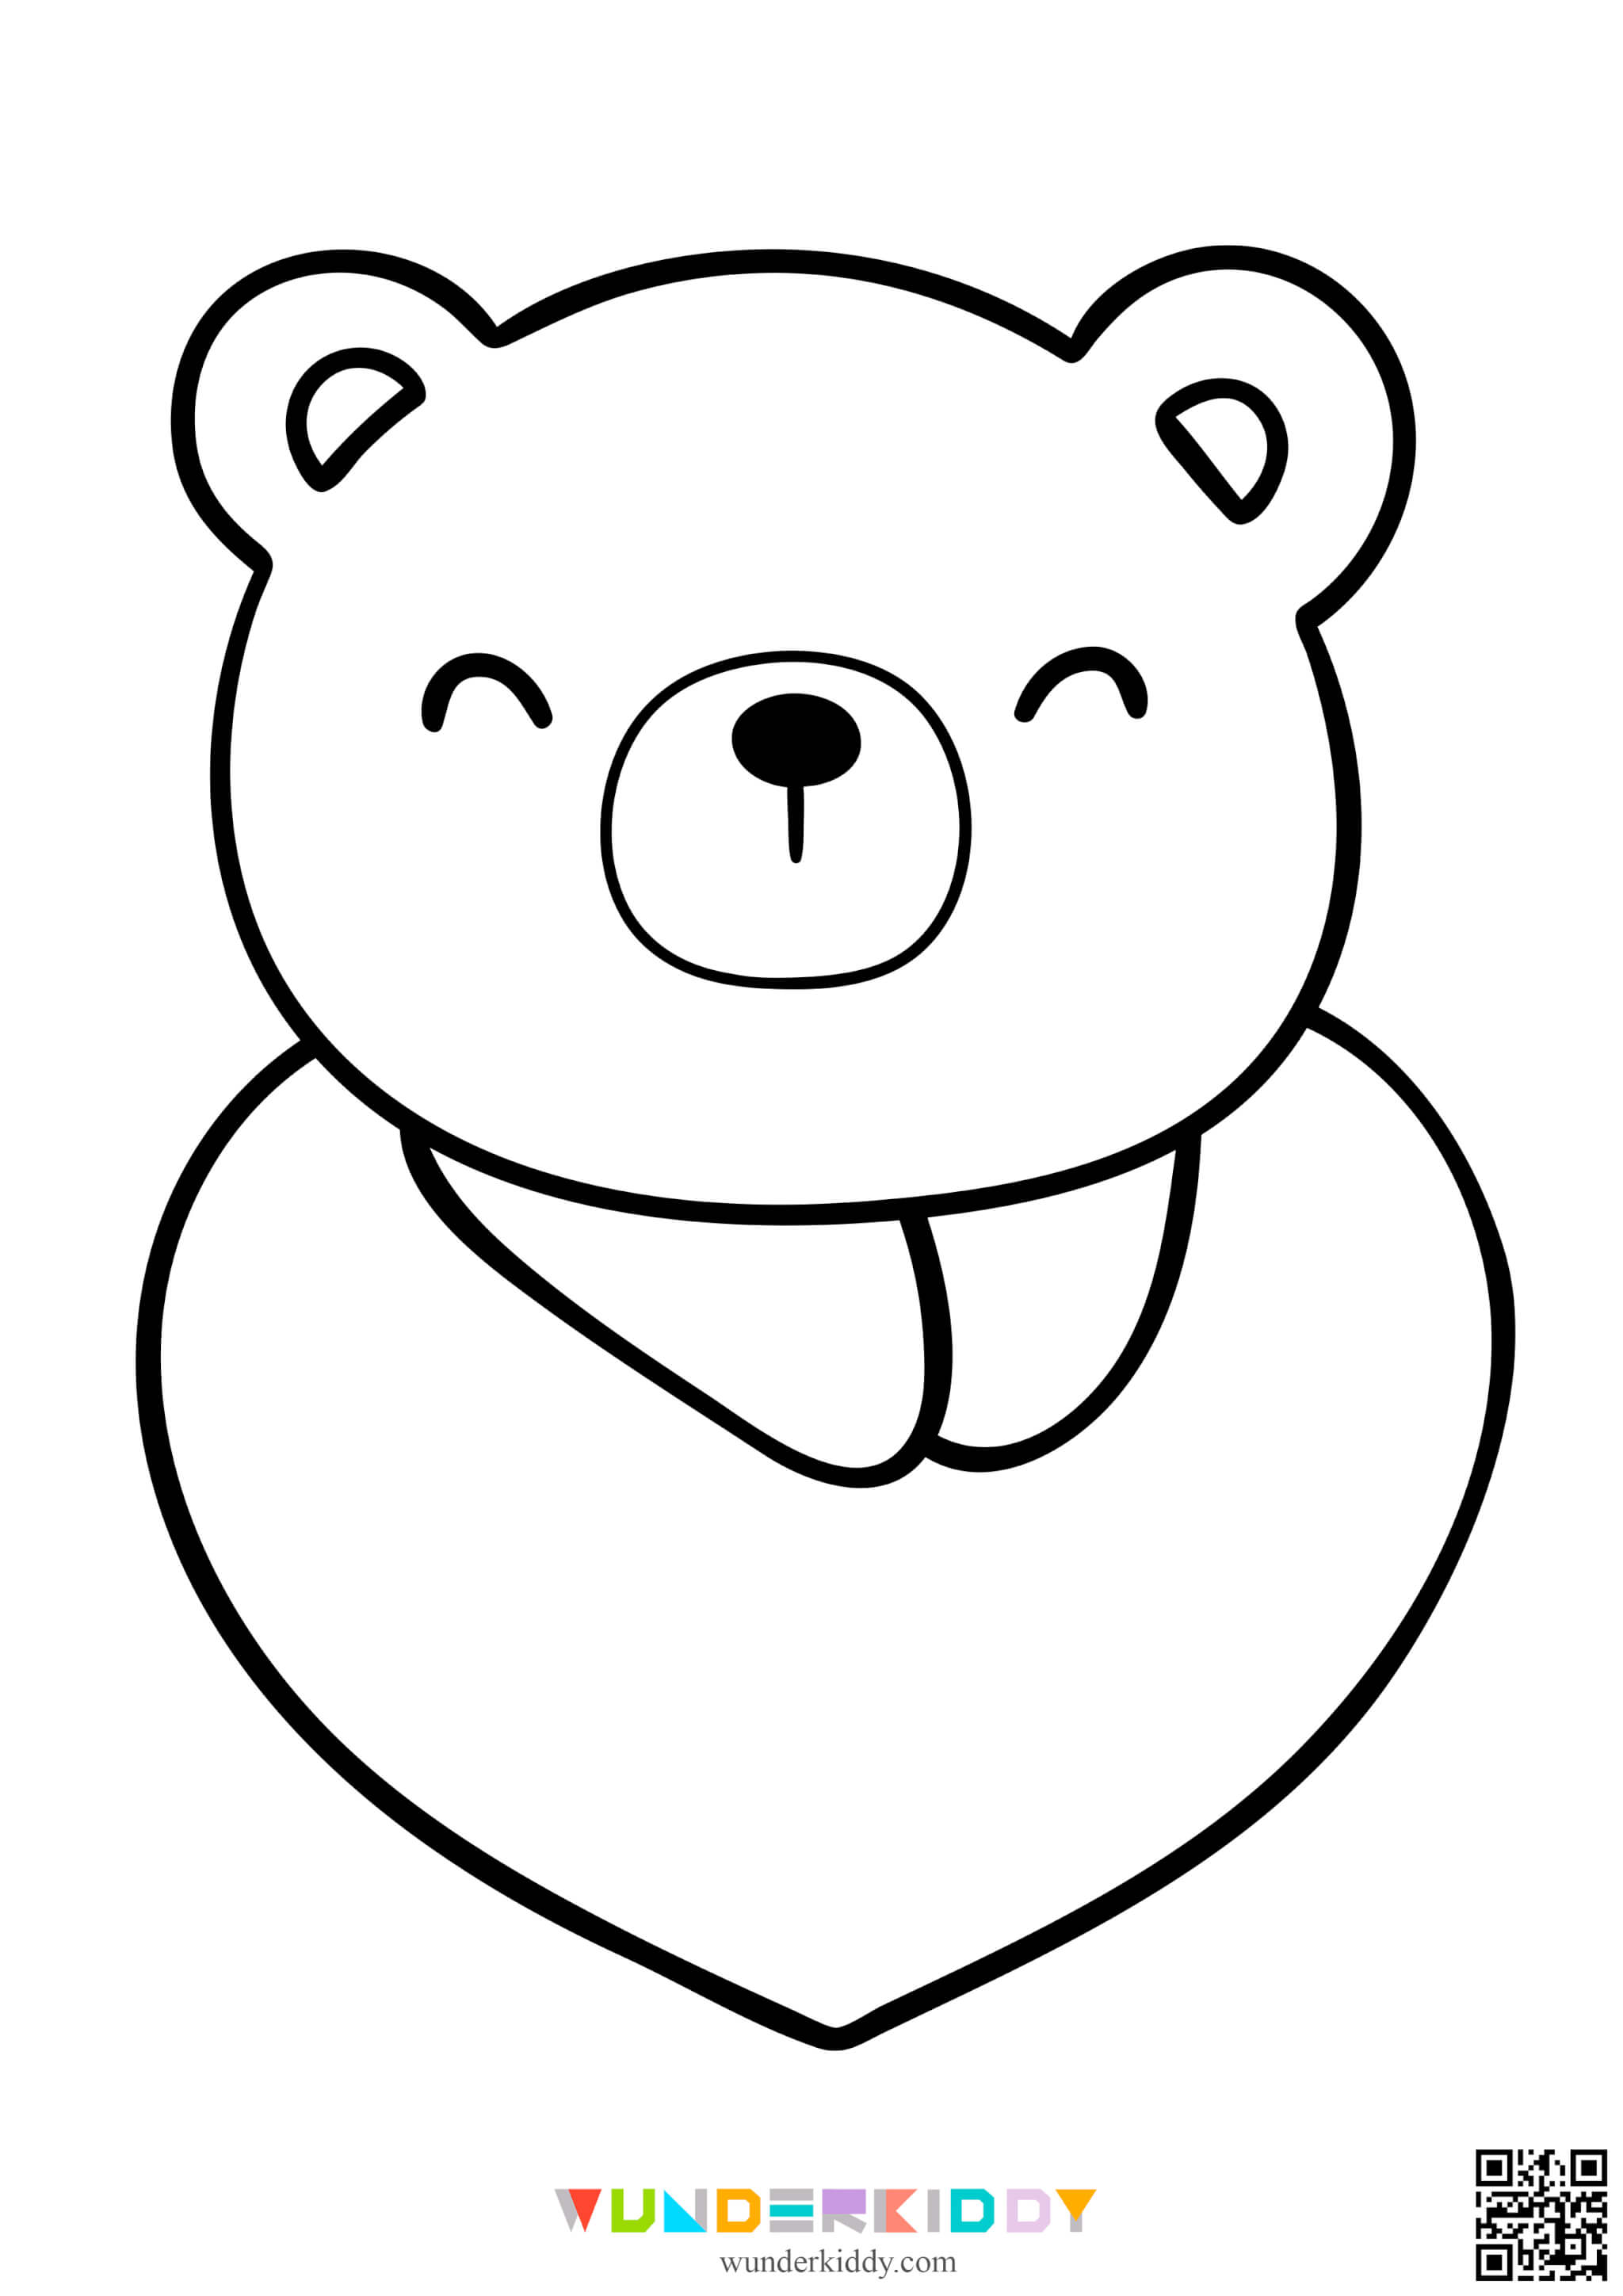 Valentines Coloring Pages - Image 7